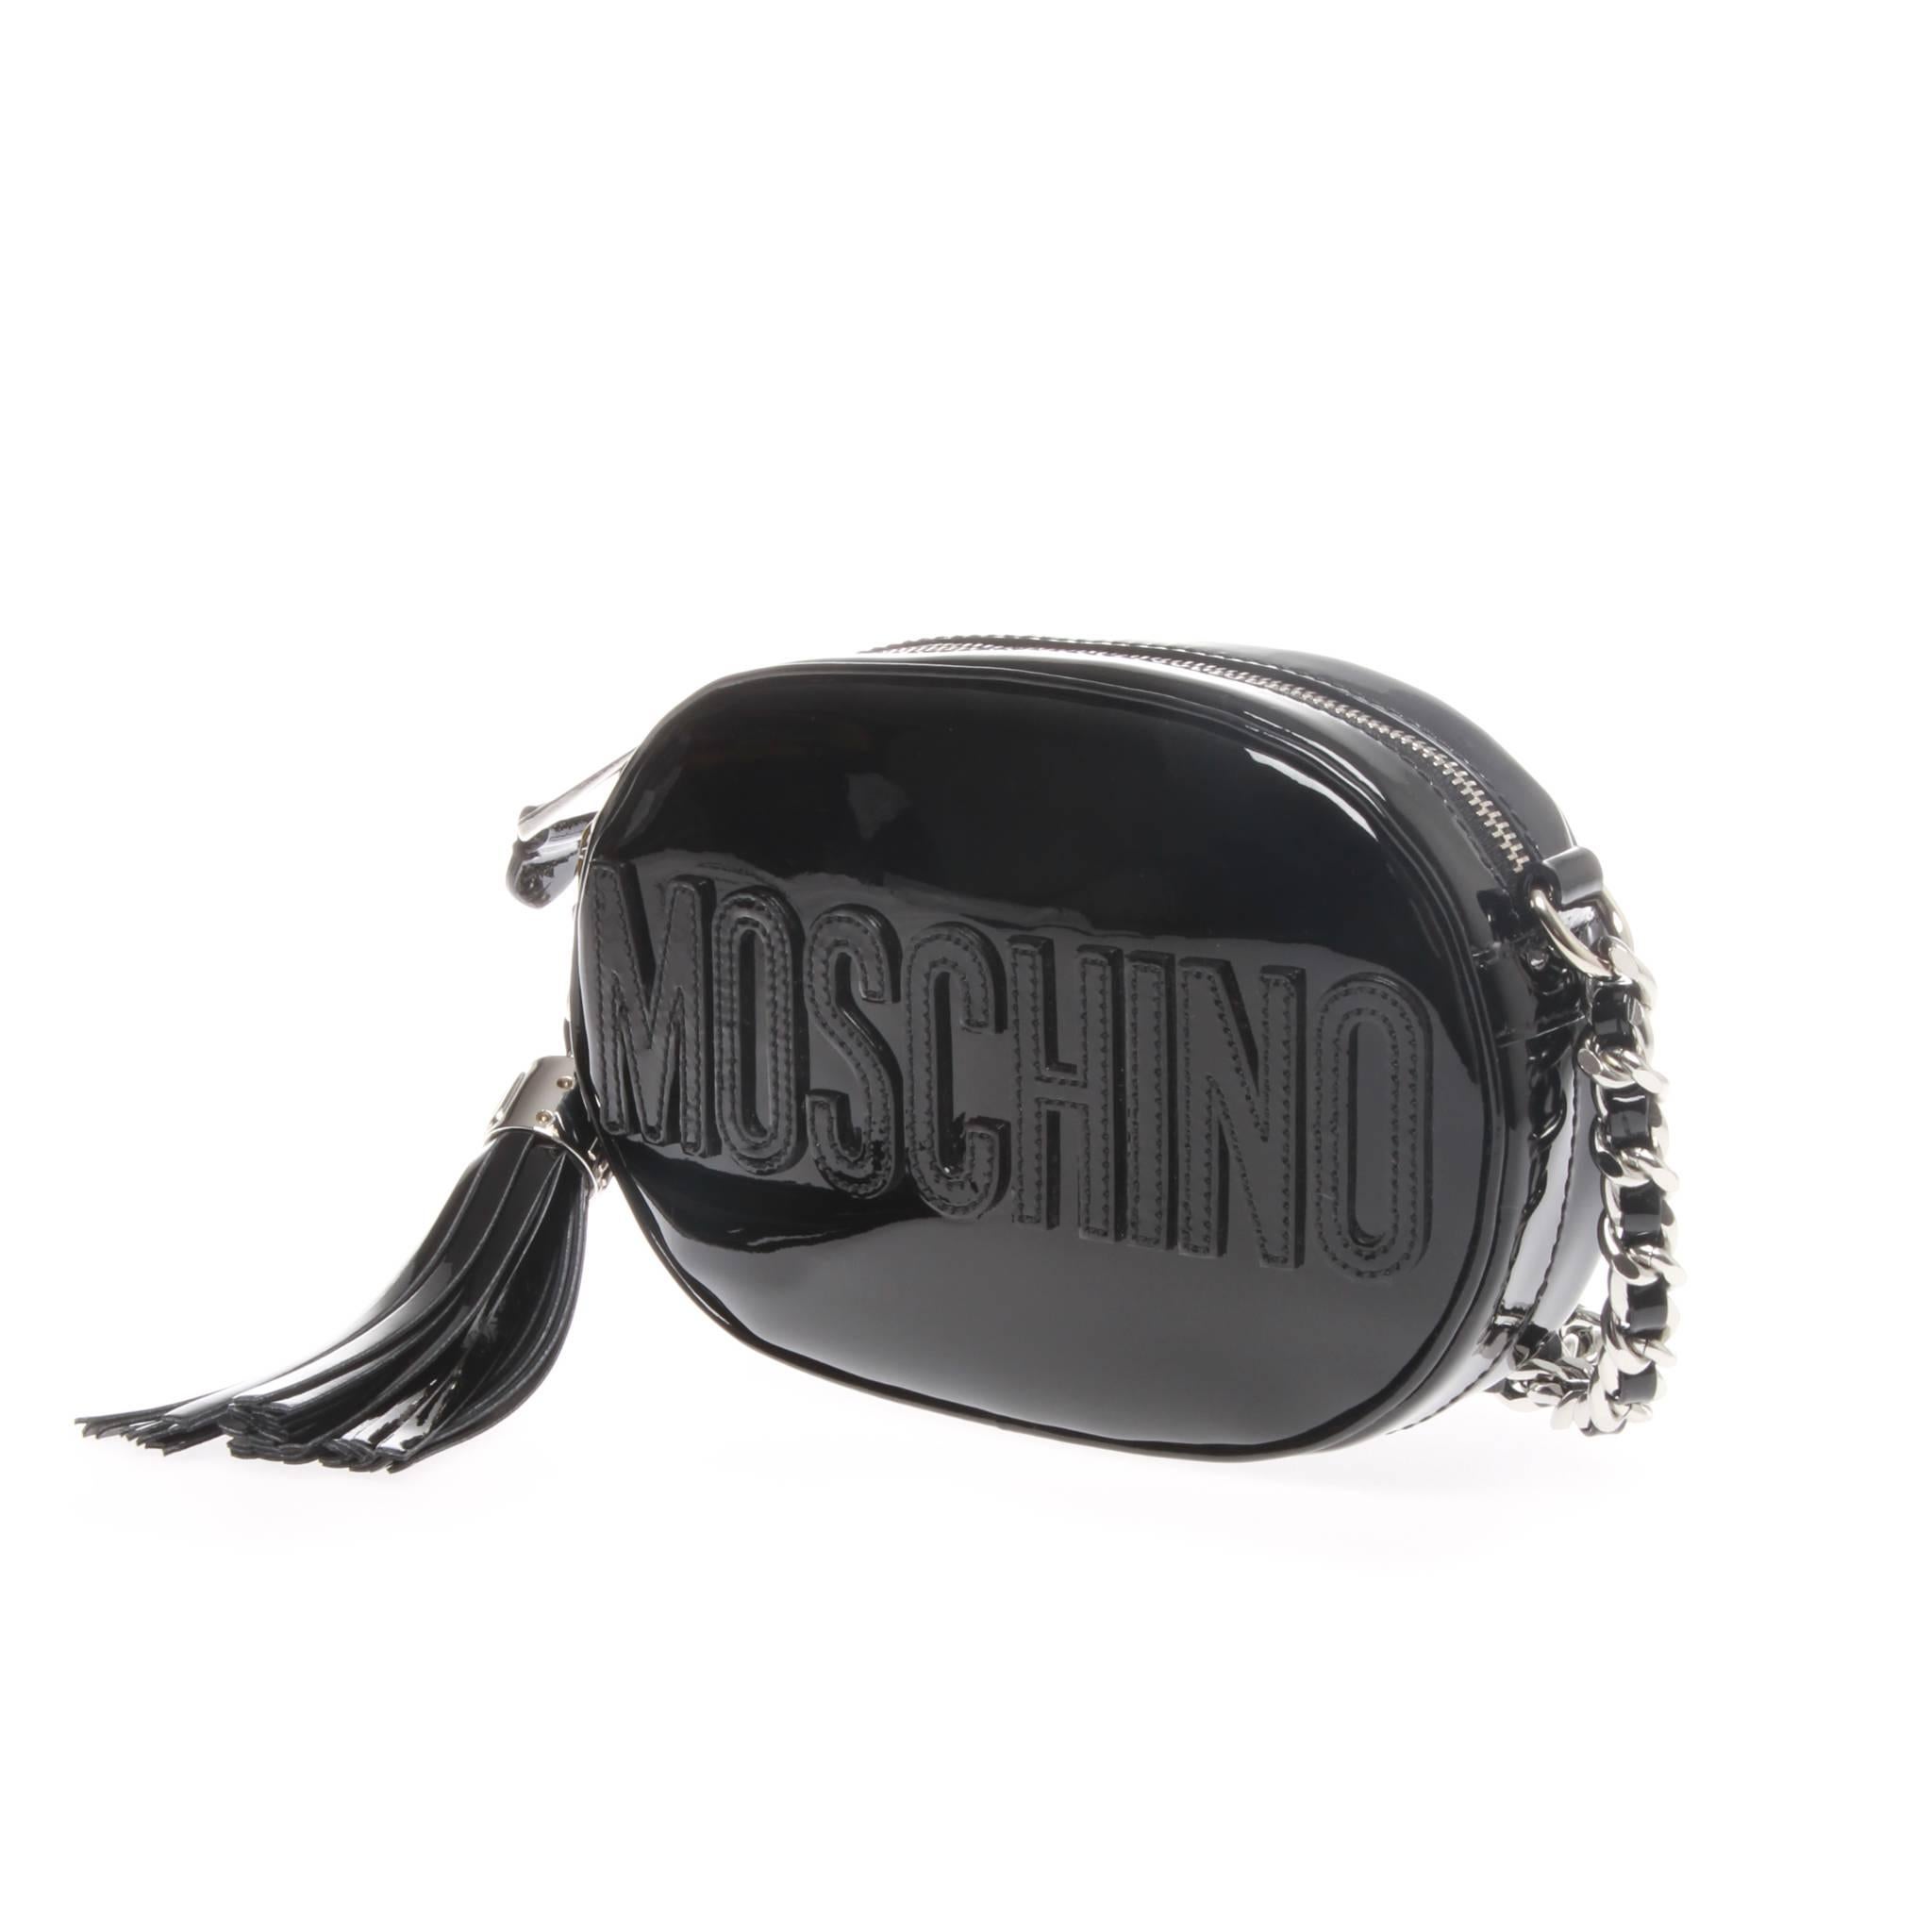 Moschino oval logo cross-body bag in black patent leather. MOSCHINO applique to front side is the bags main design feature, as well as a removable tassel bag charm in matching red patent leather that is also threaded through the chain shoulder